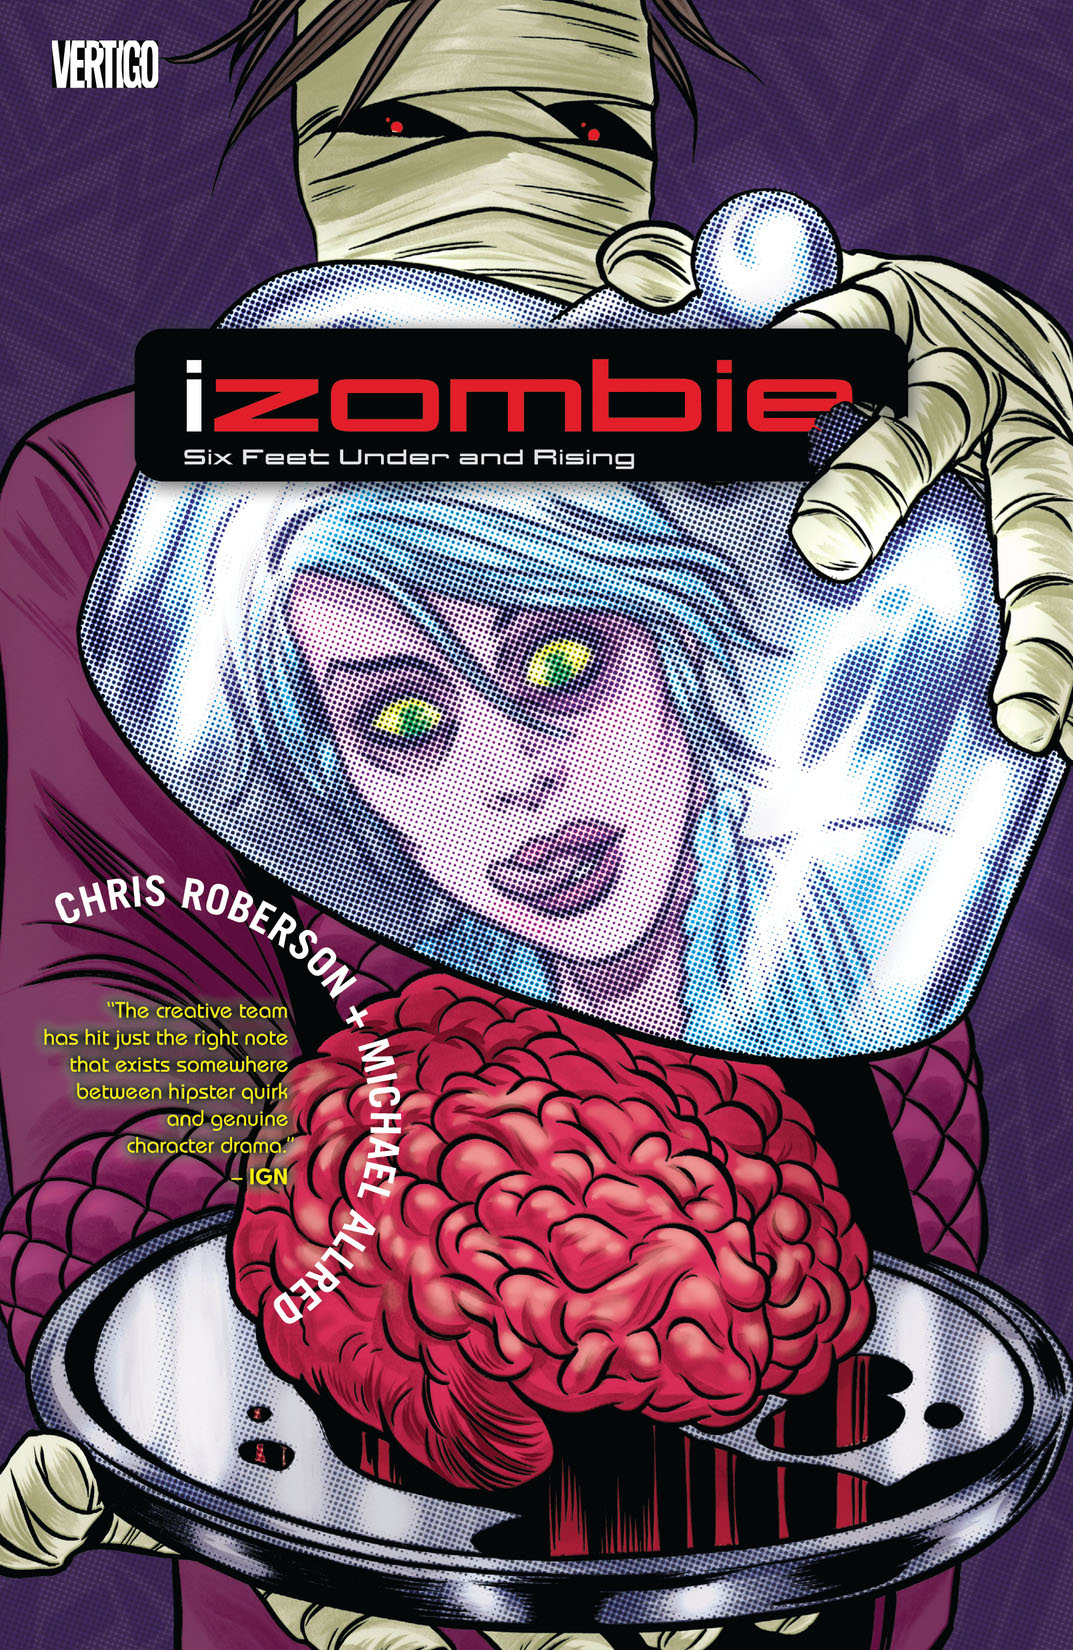 iZombie Vol. 3: Six Feet Under & Rising preview images